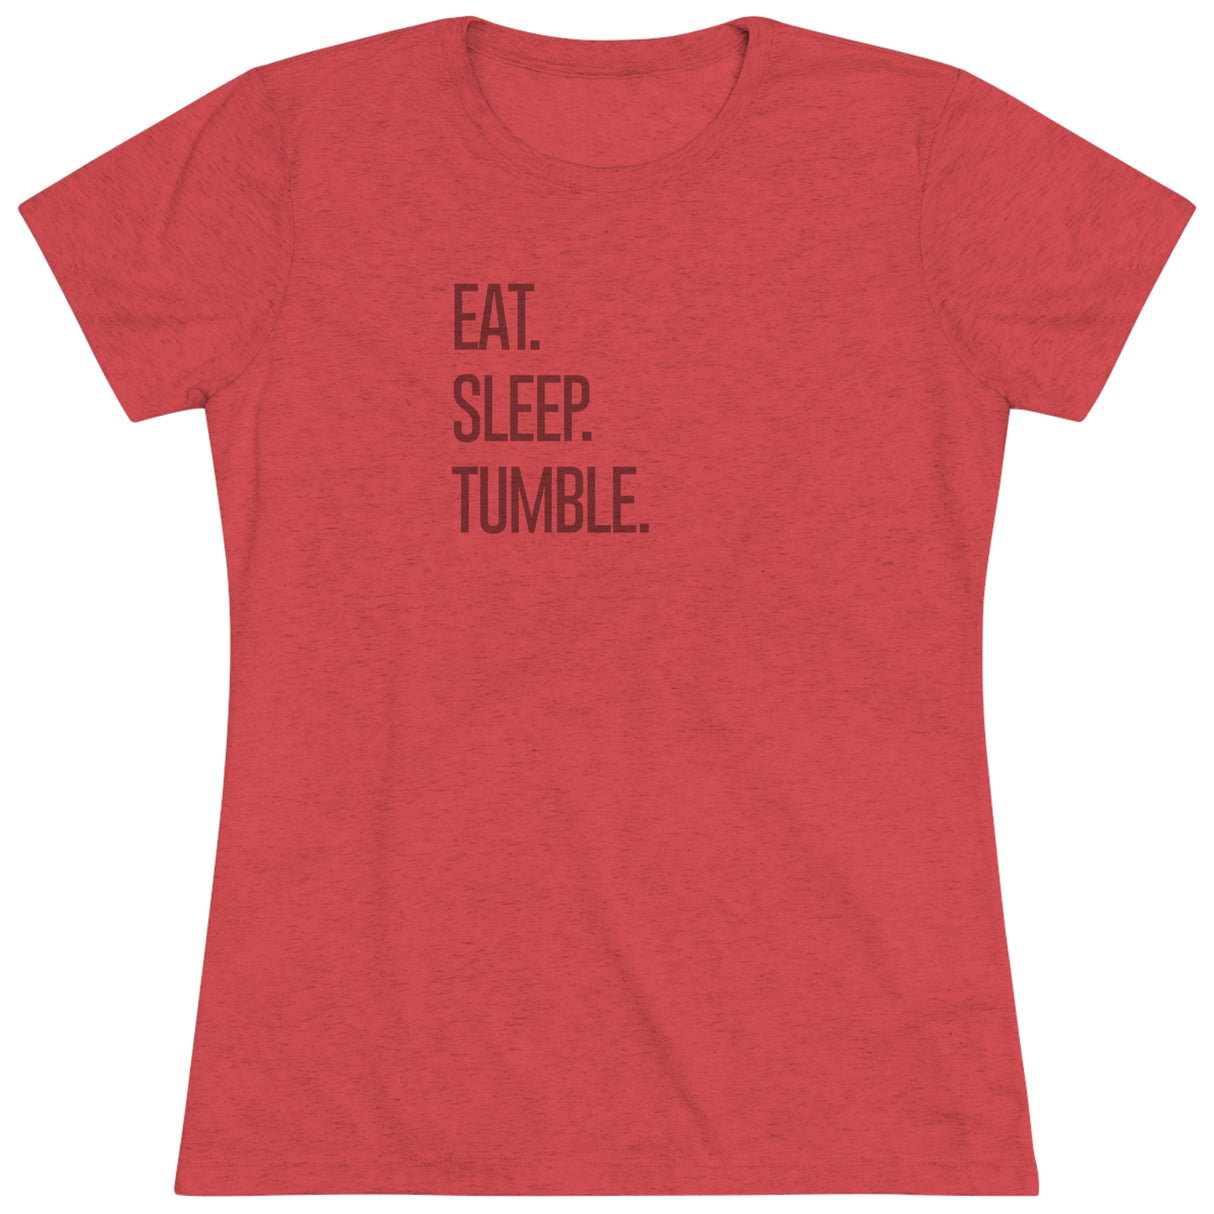 "Eat. Sleep. Tumble." T-Shirt (Fitted)